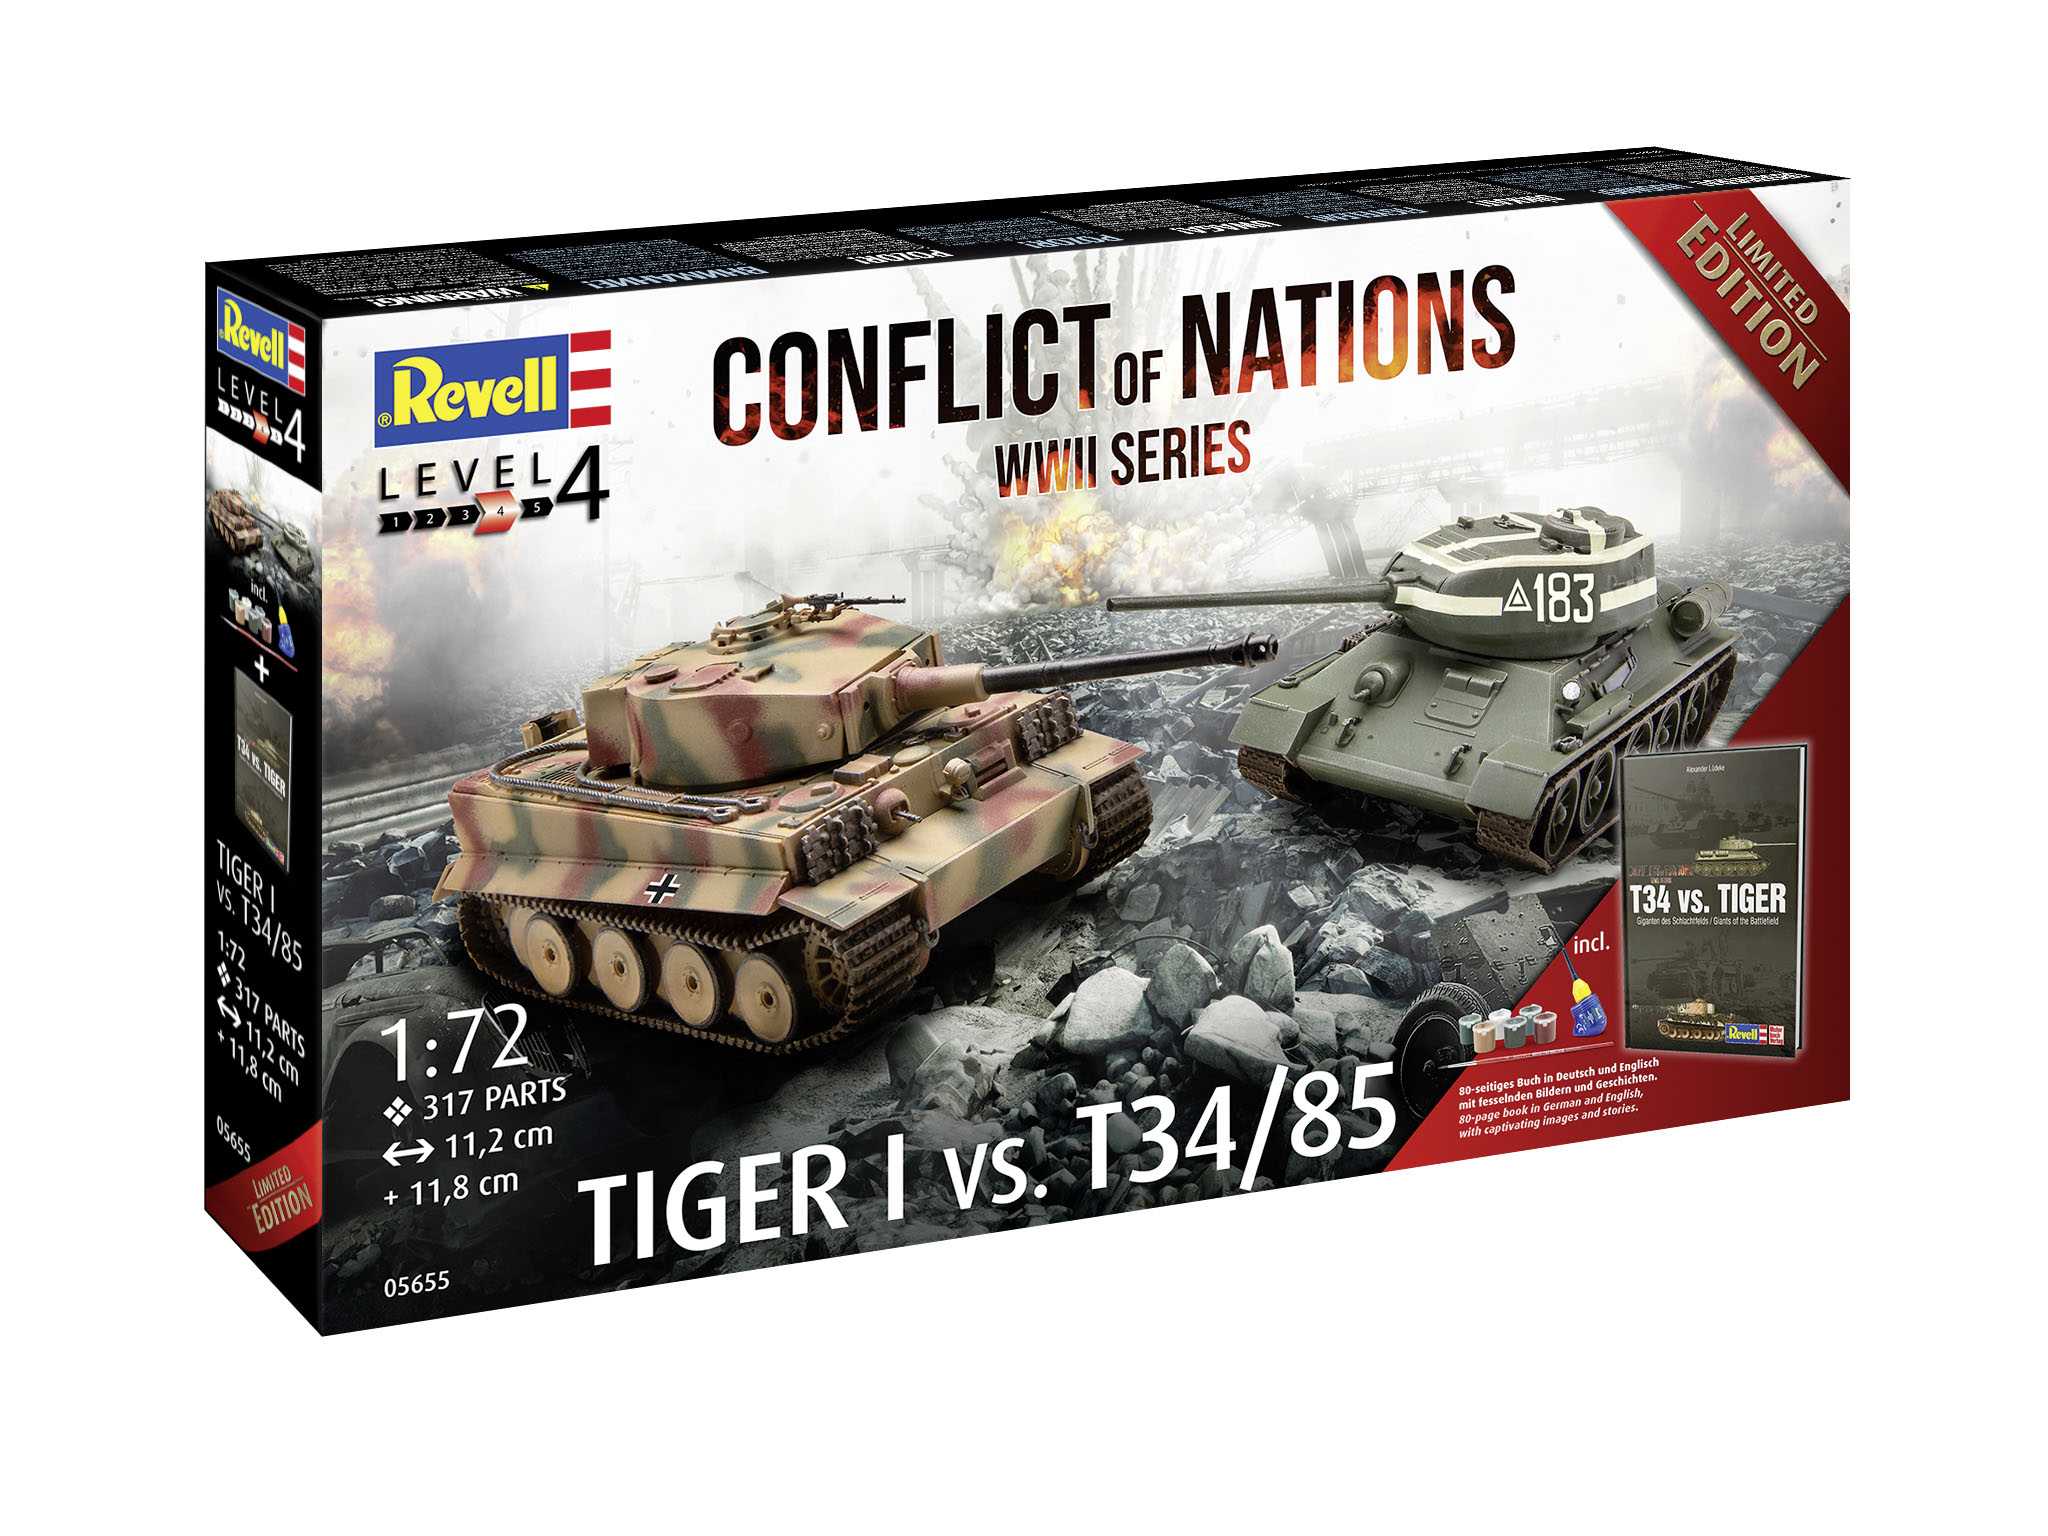 Fotografie Gift-Set military 05655 - Conflict of Nations Series "Limited Edition" (1:72)